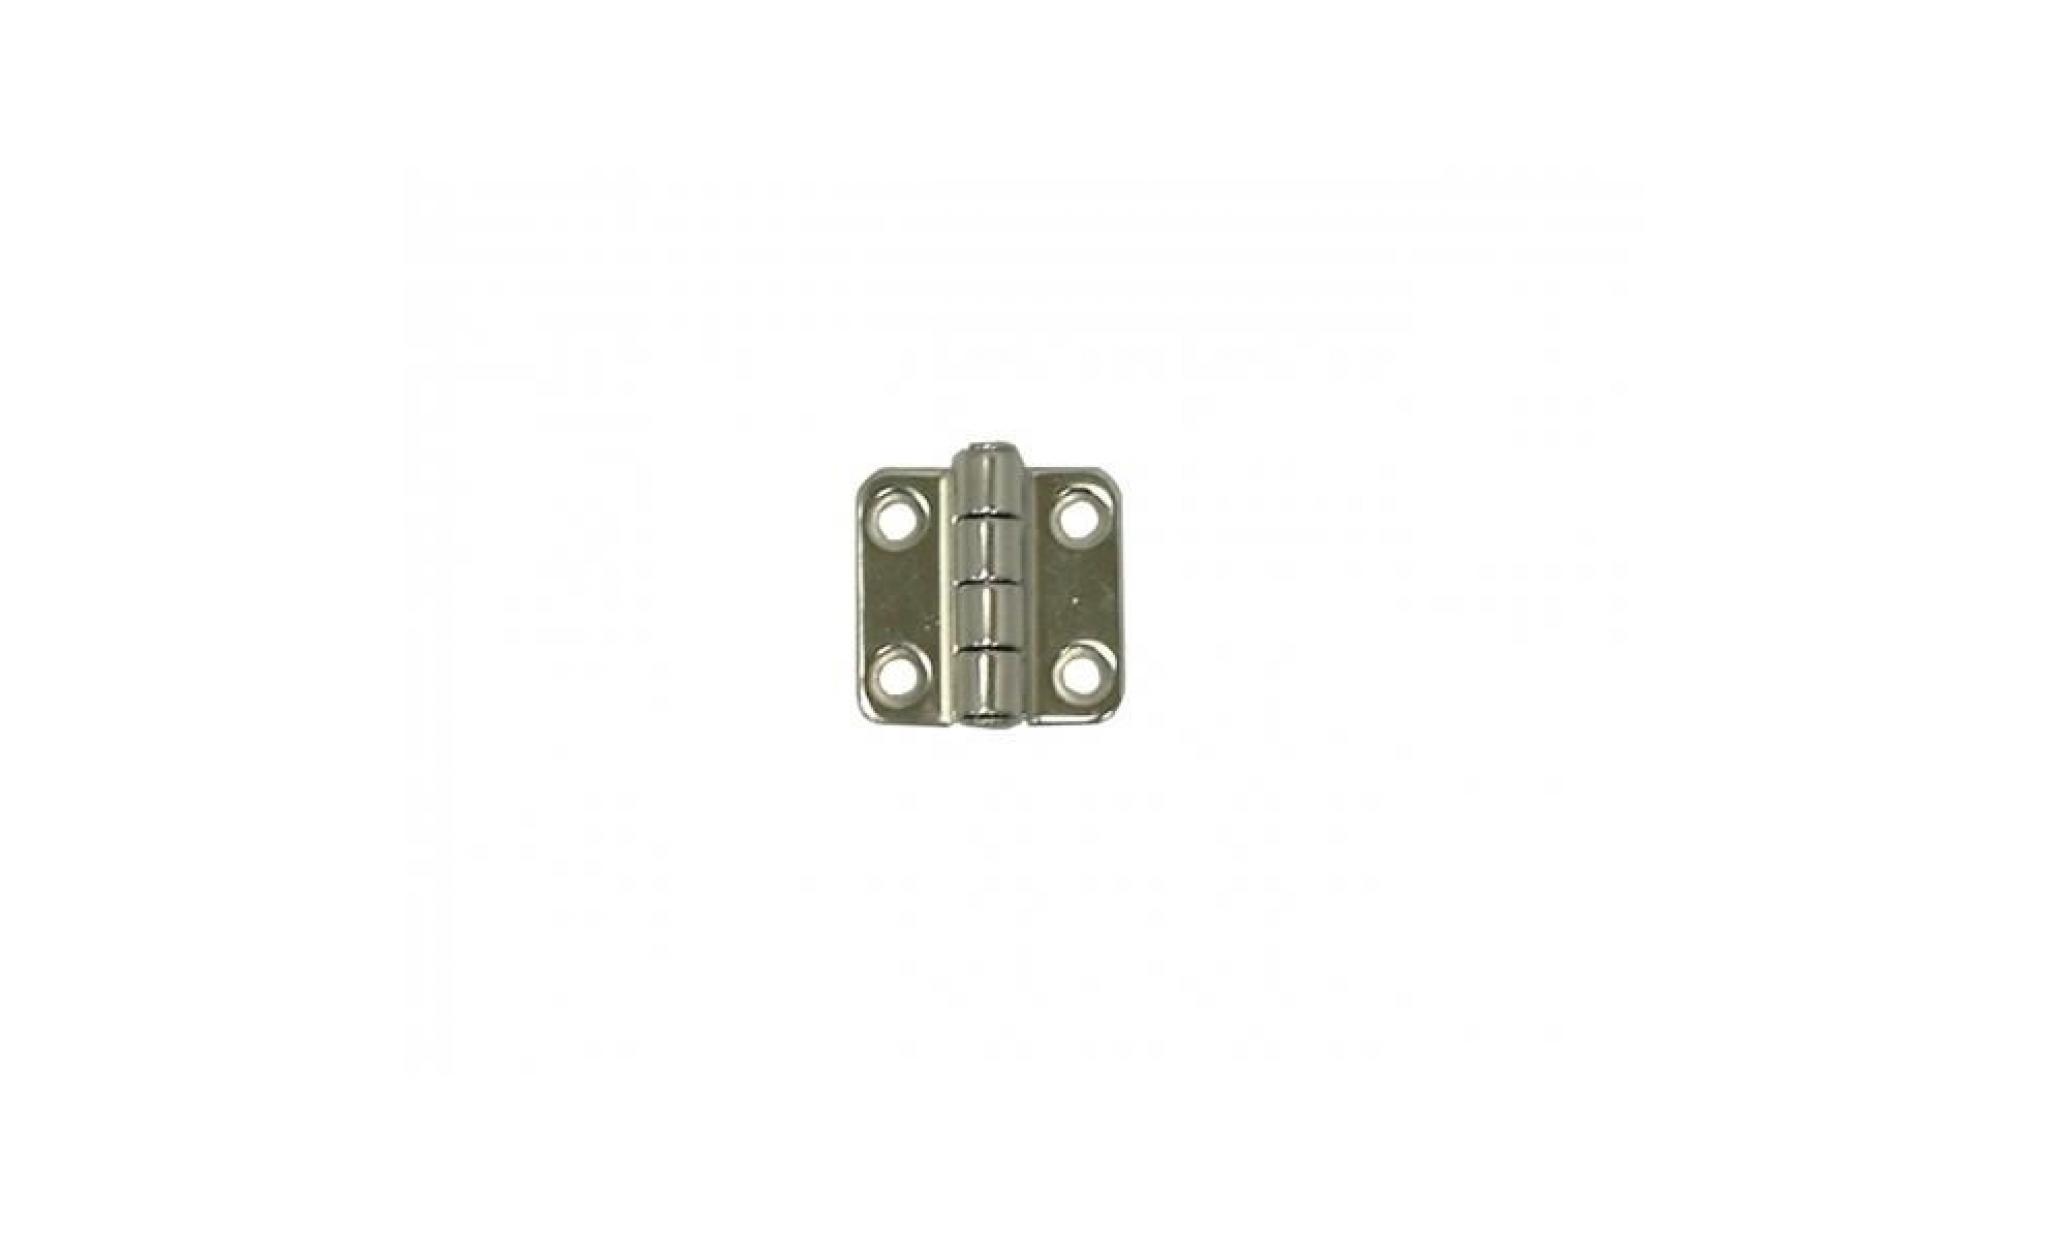 hinge stainless steel a2 32mmx37mmx19mm arbo inox365